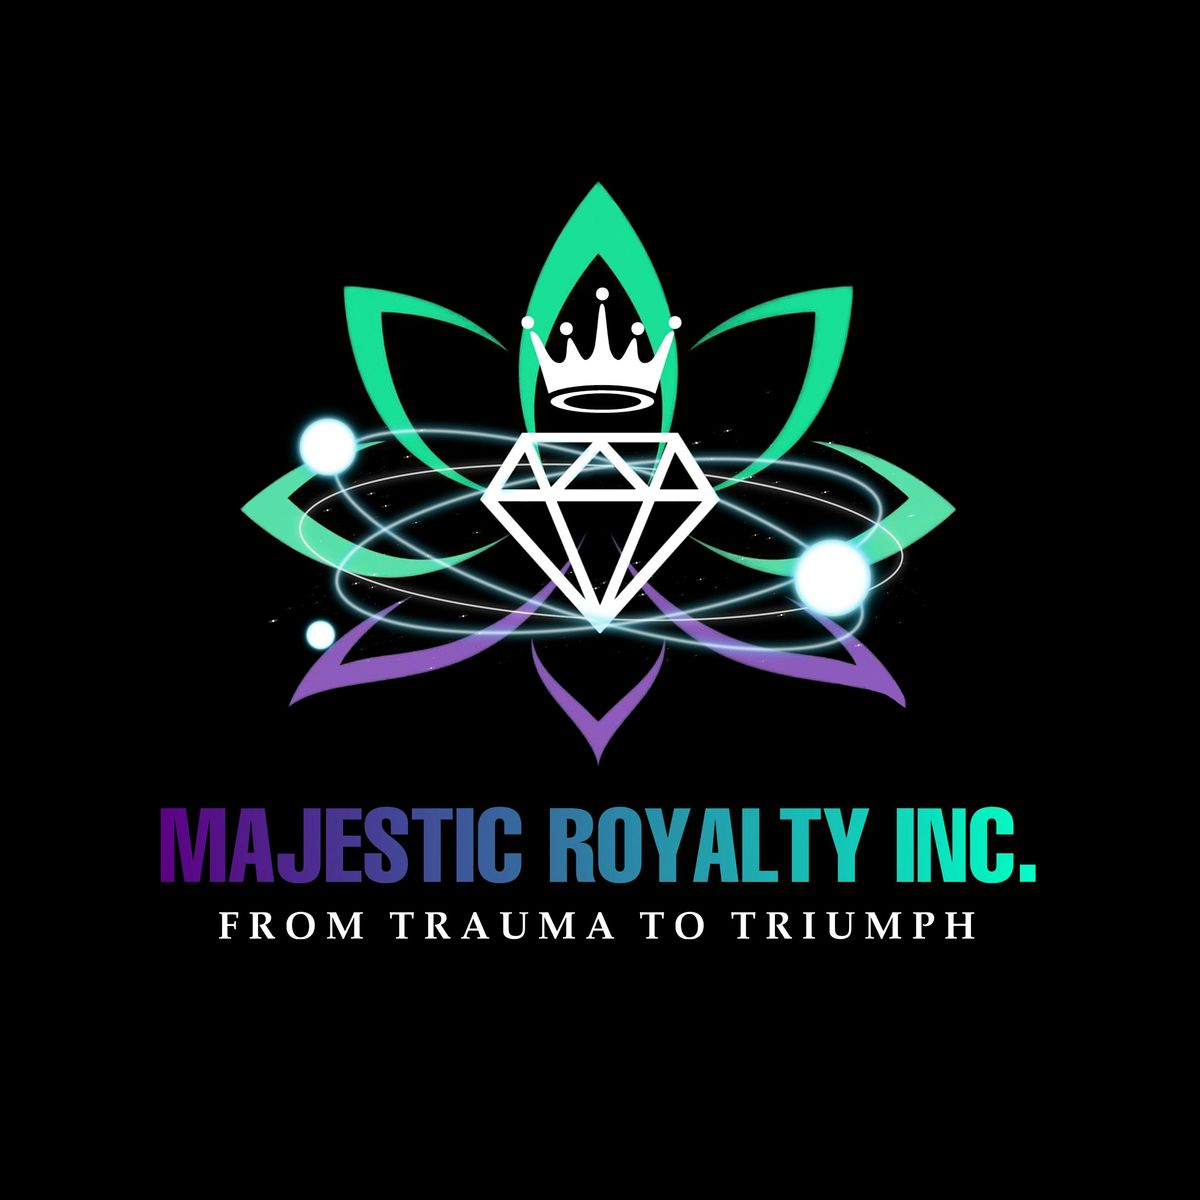 Join Majestic Royalty for Wicks & Wine